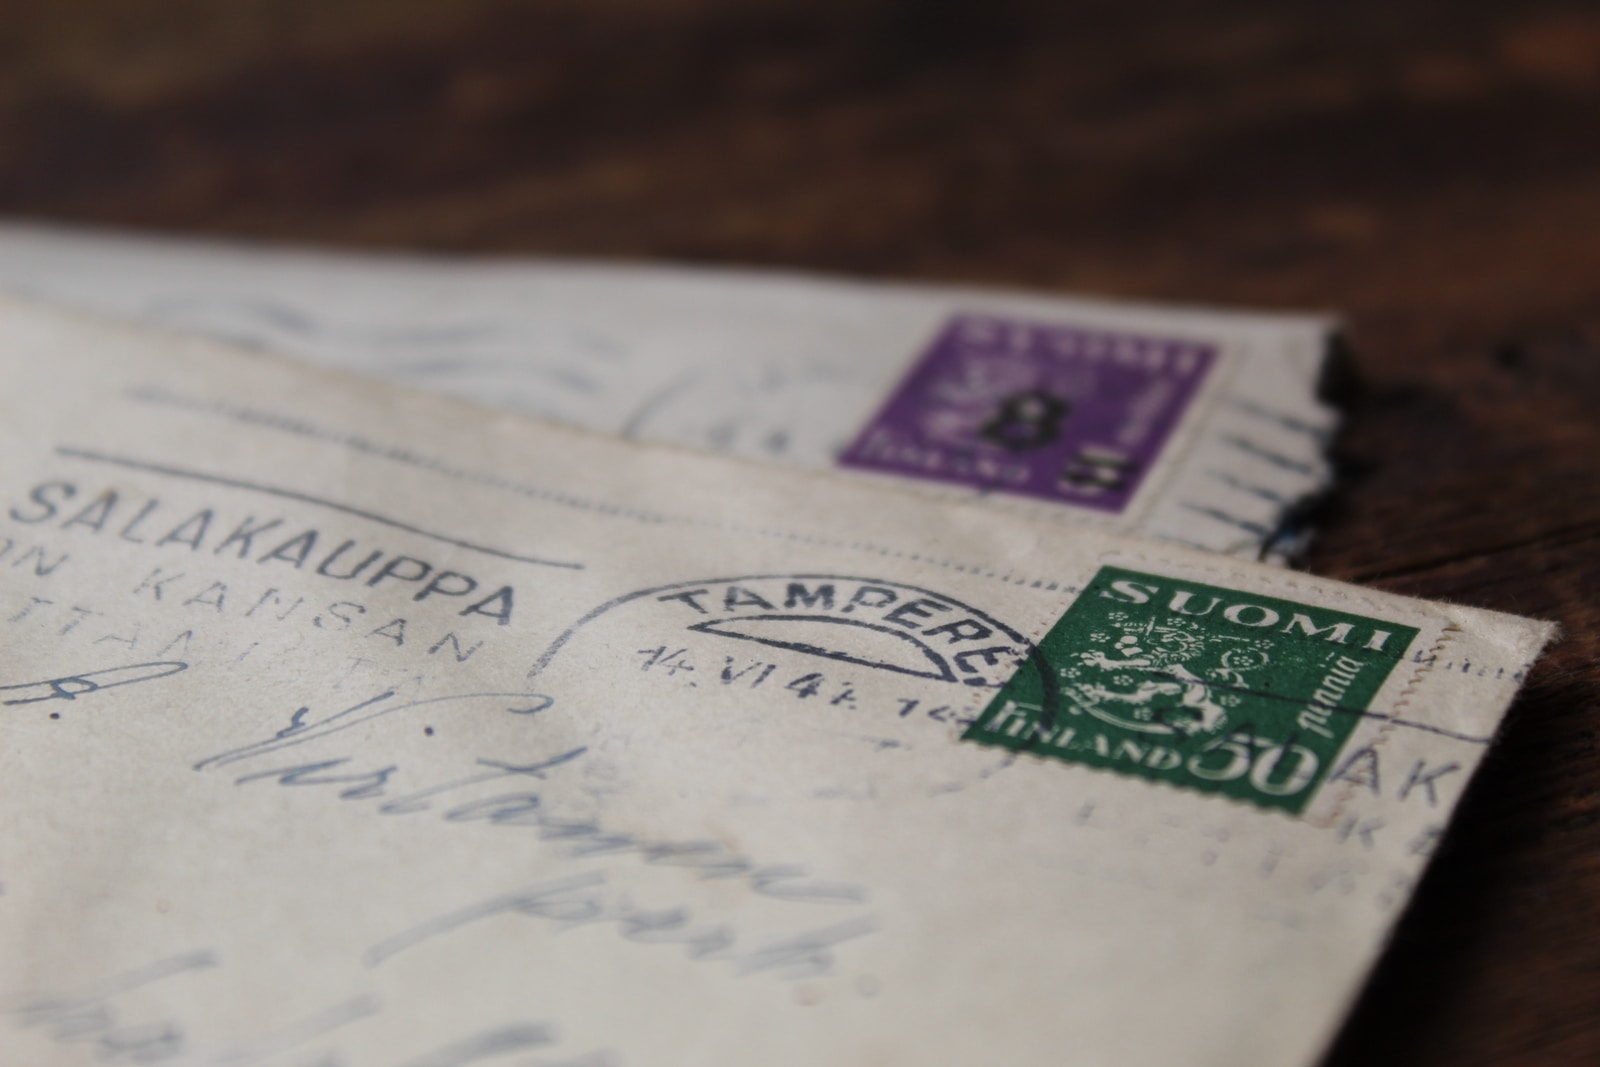 Postmark and stamped letters.